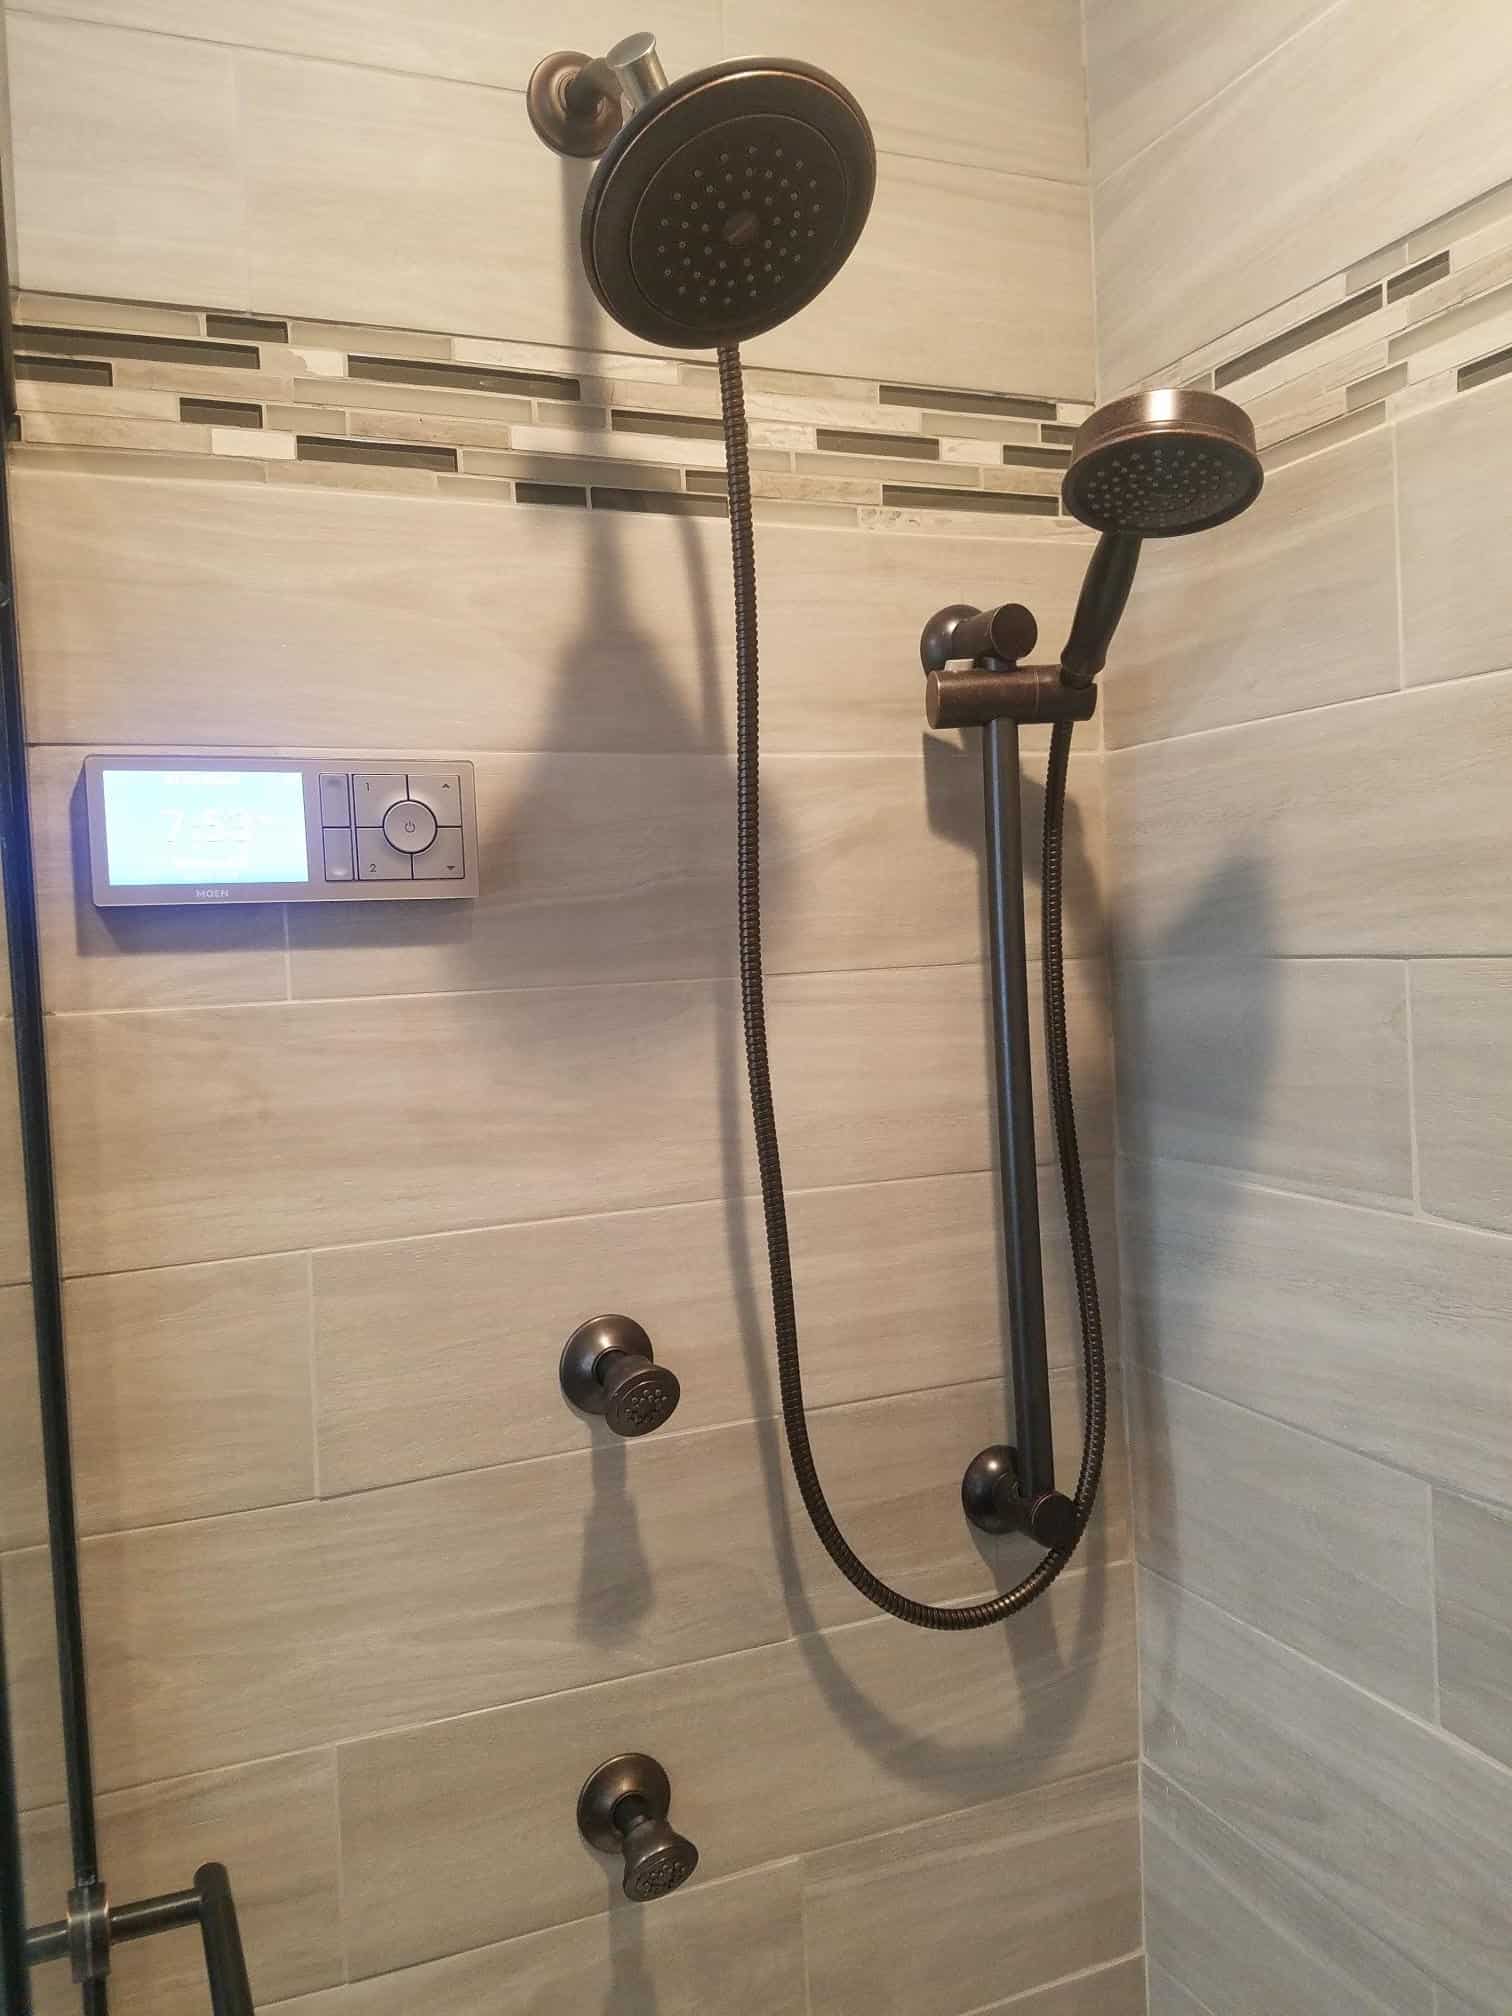 voice activated sprayers and shower head